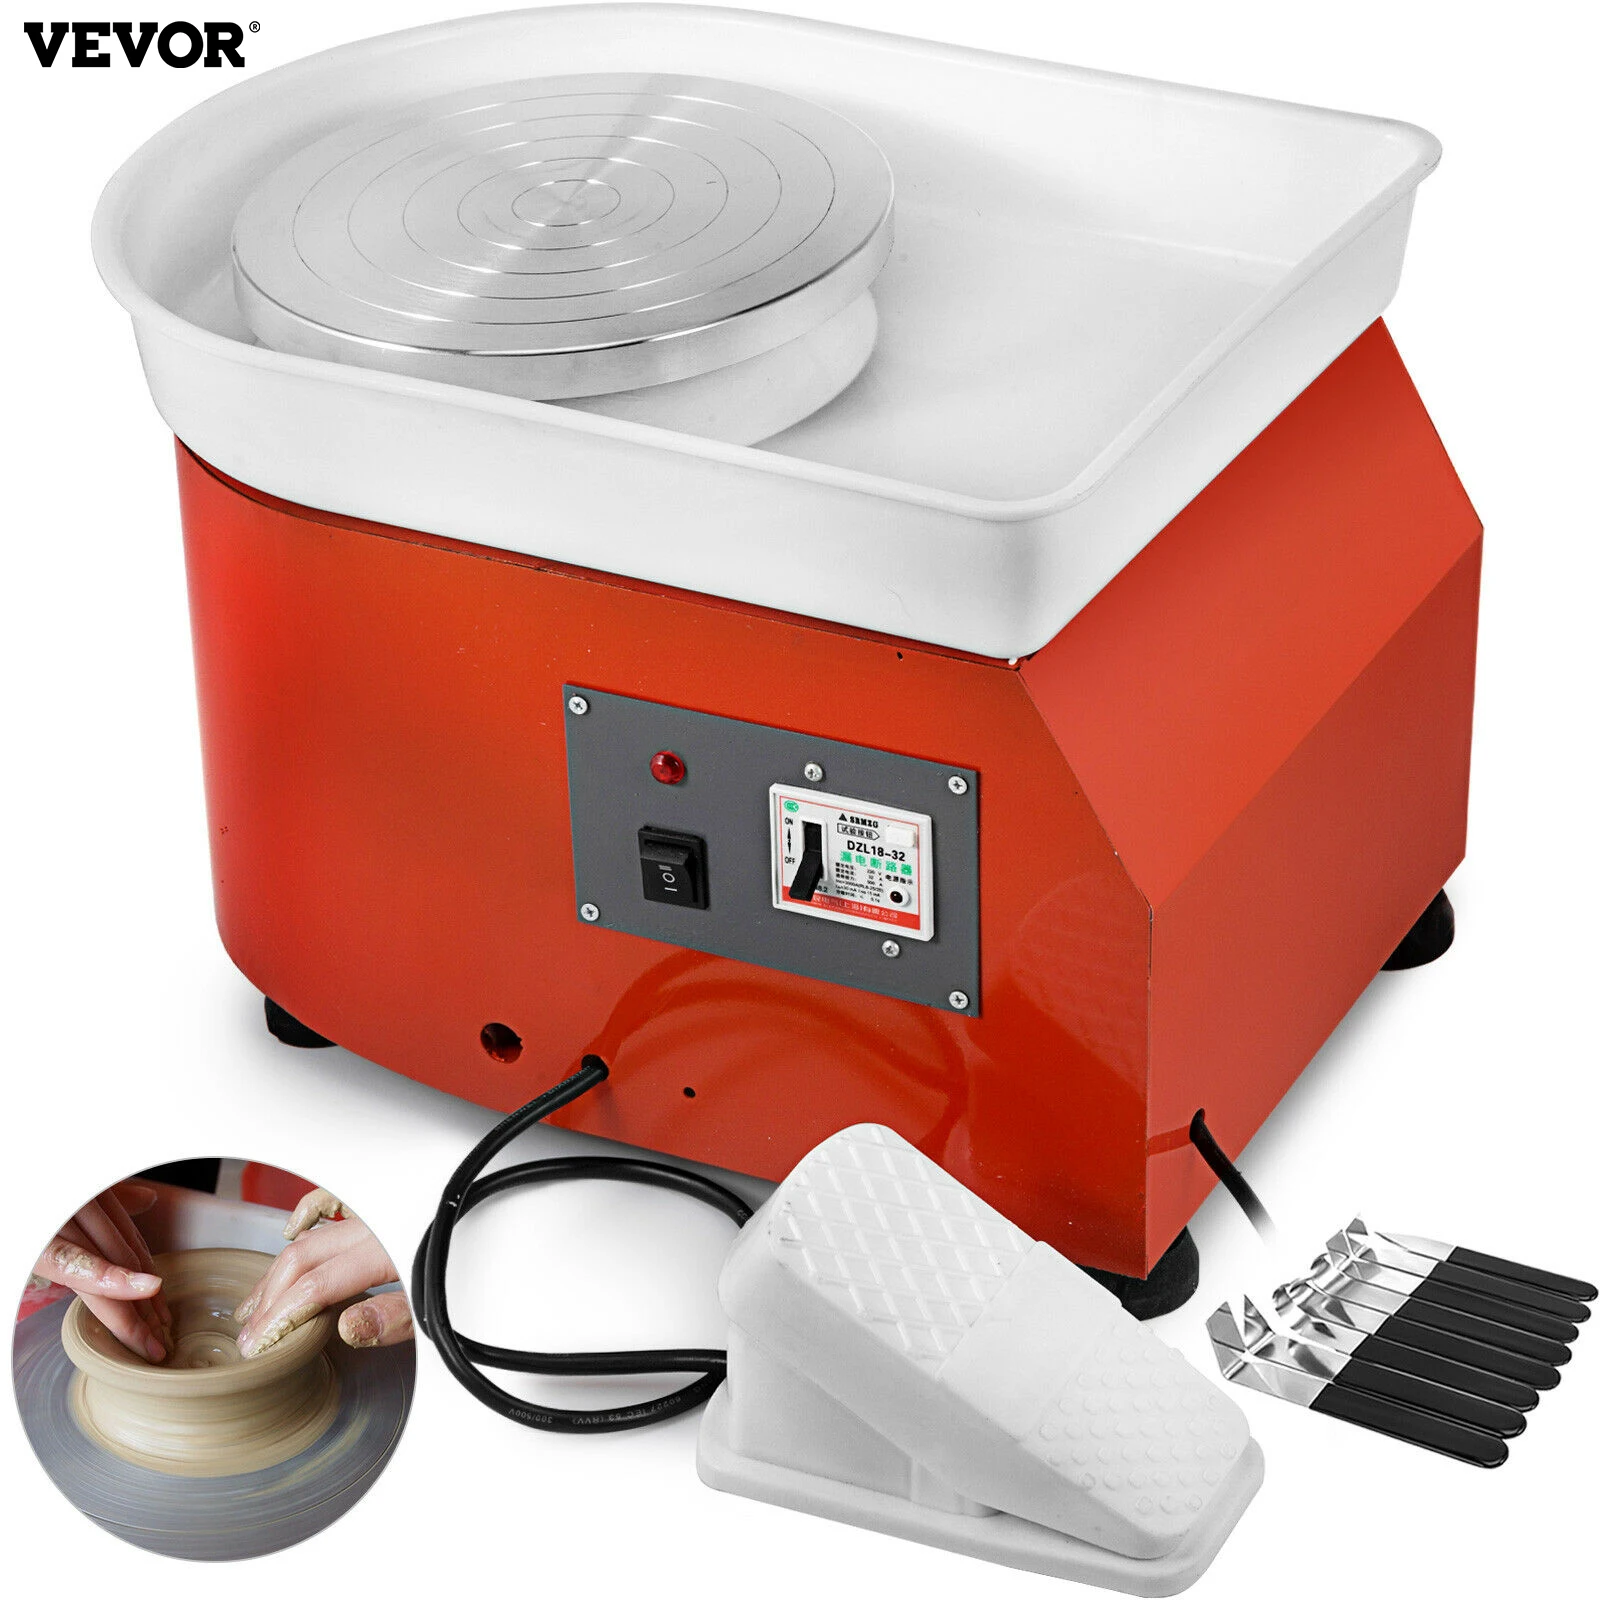 

VEVOR Ceramic Work Ceramics 280W Pottery Forming Machine Electric Pottery Wheel DIY Clay Tool with Tray Flexible Foot Pedal 220V